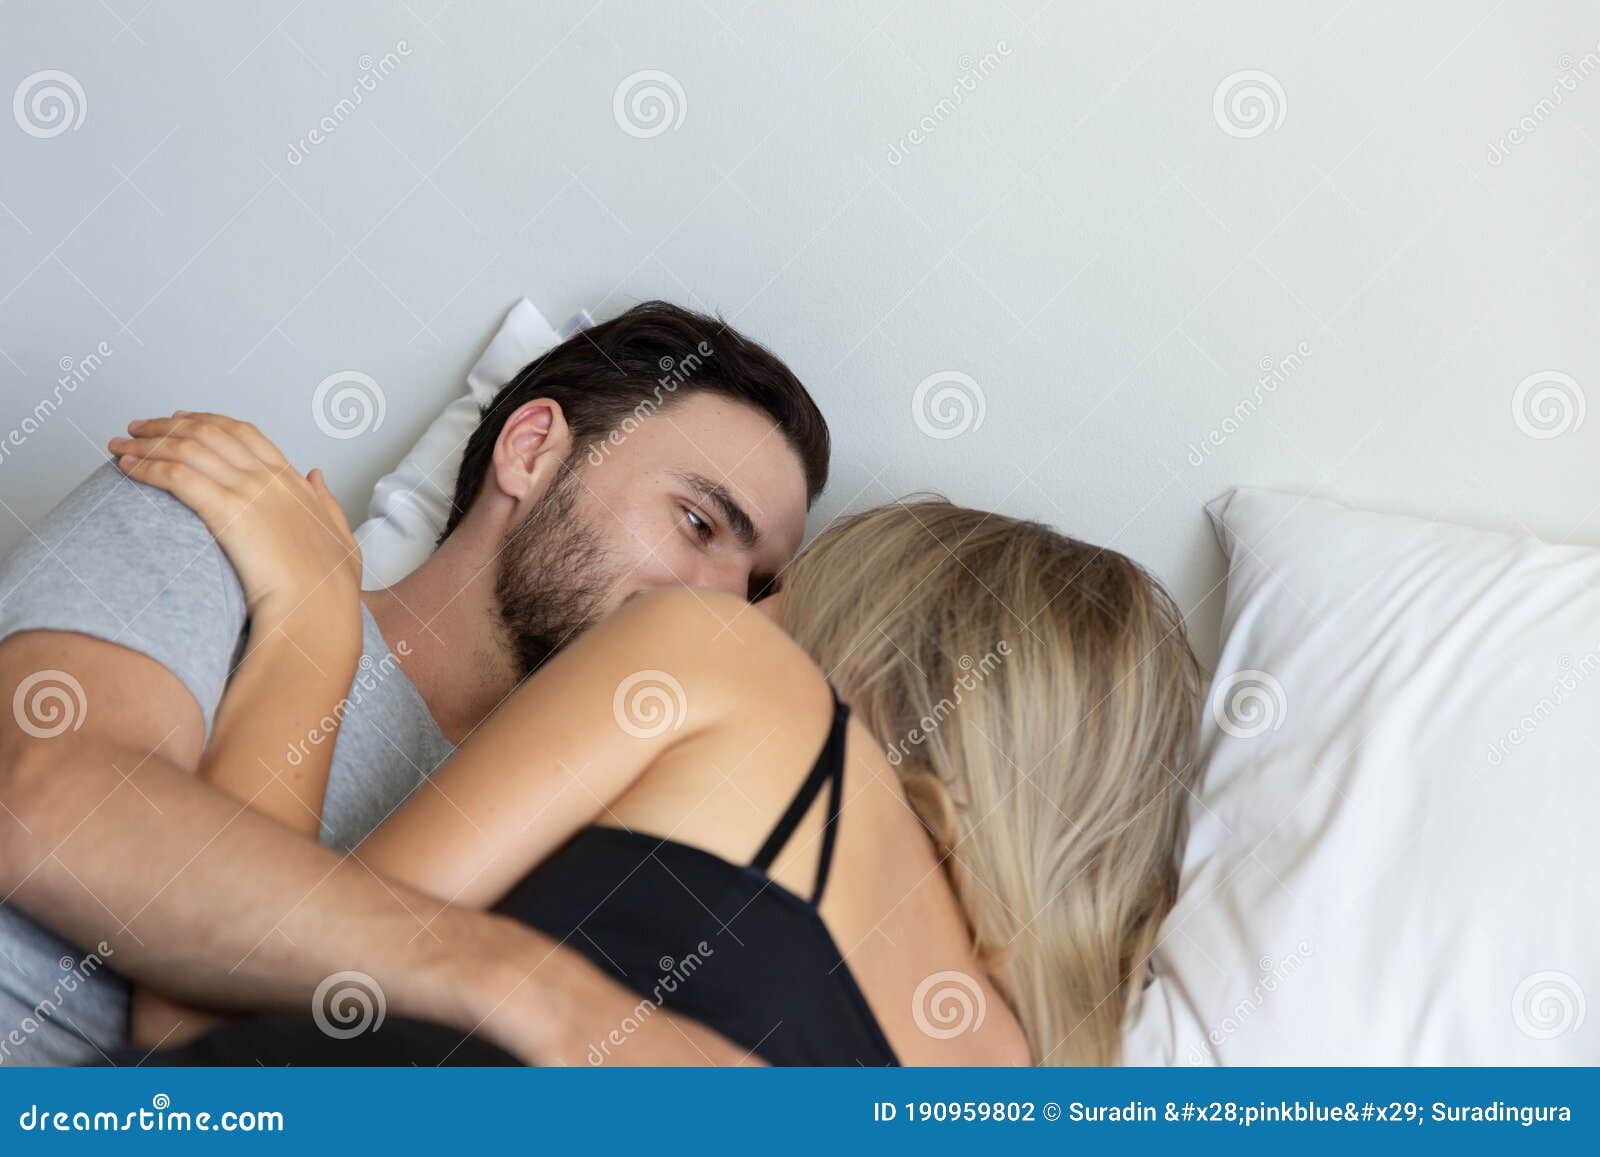 Young Cute Couple Hug and Sleep Together in Bed Stock Photo ...